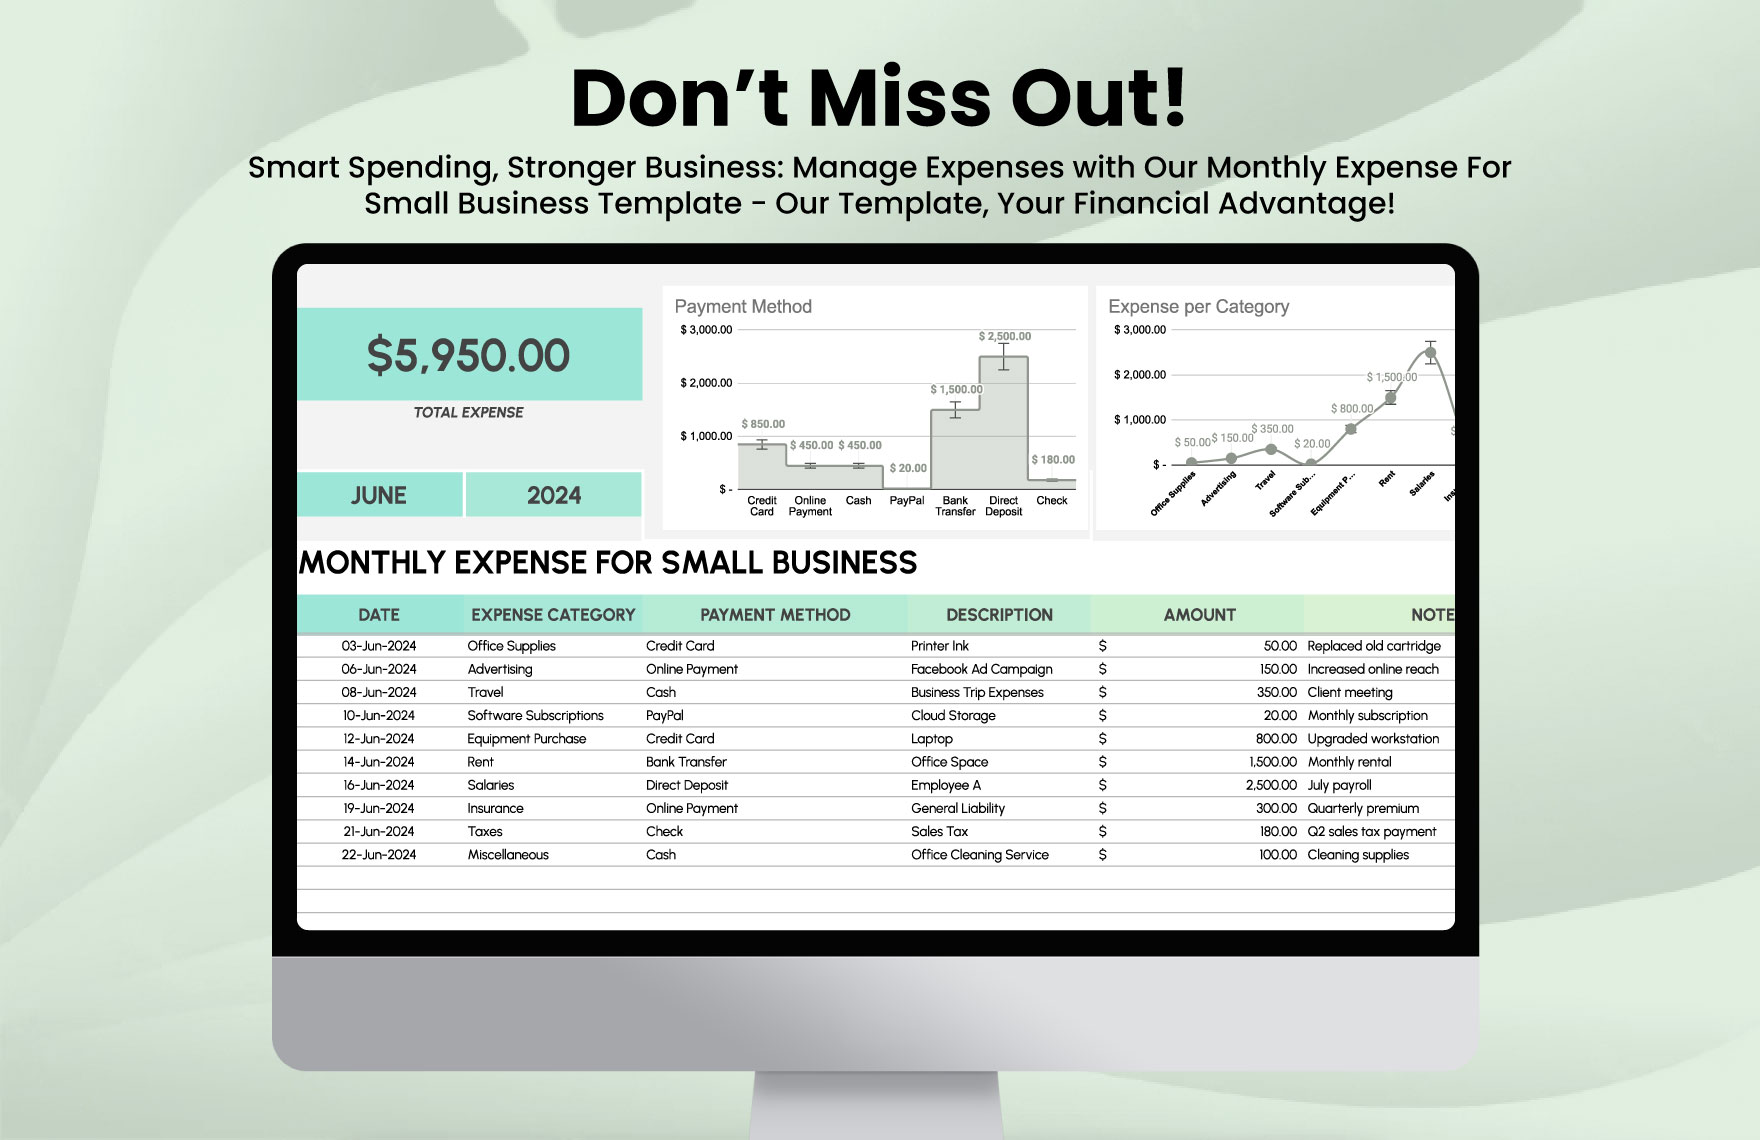 Monthly Expense for Small Business Template